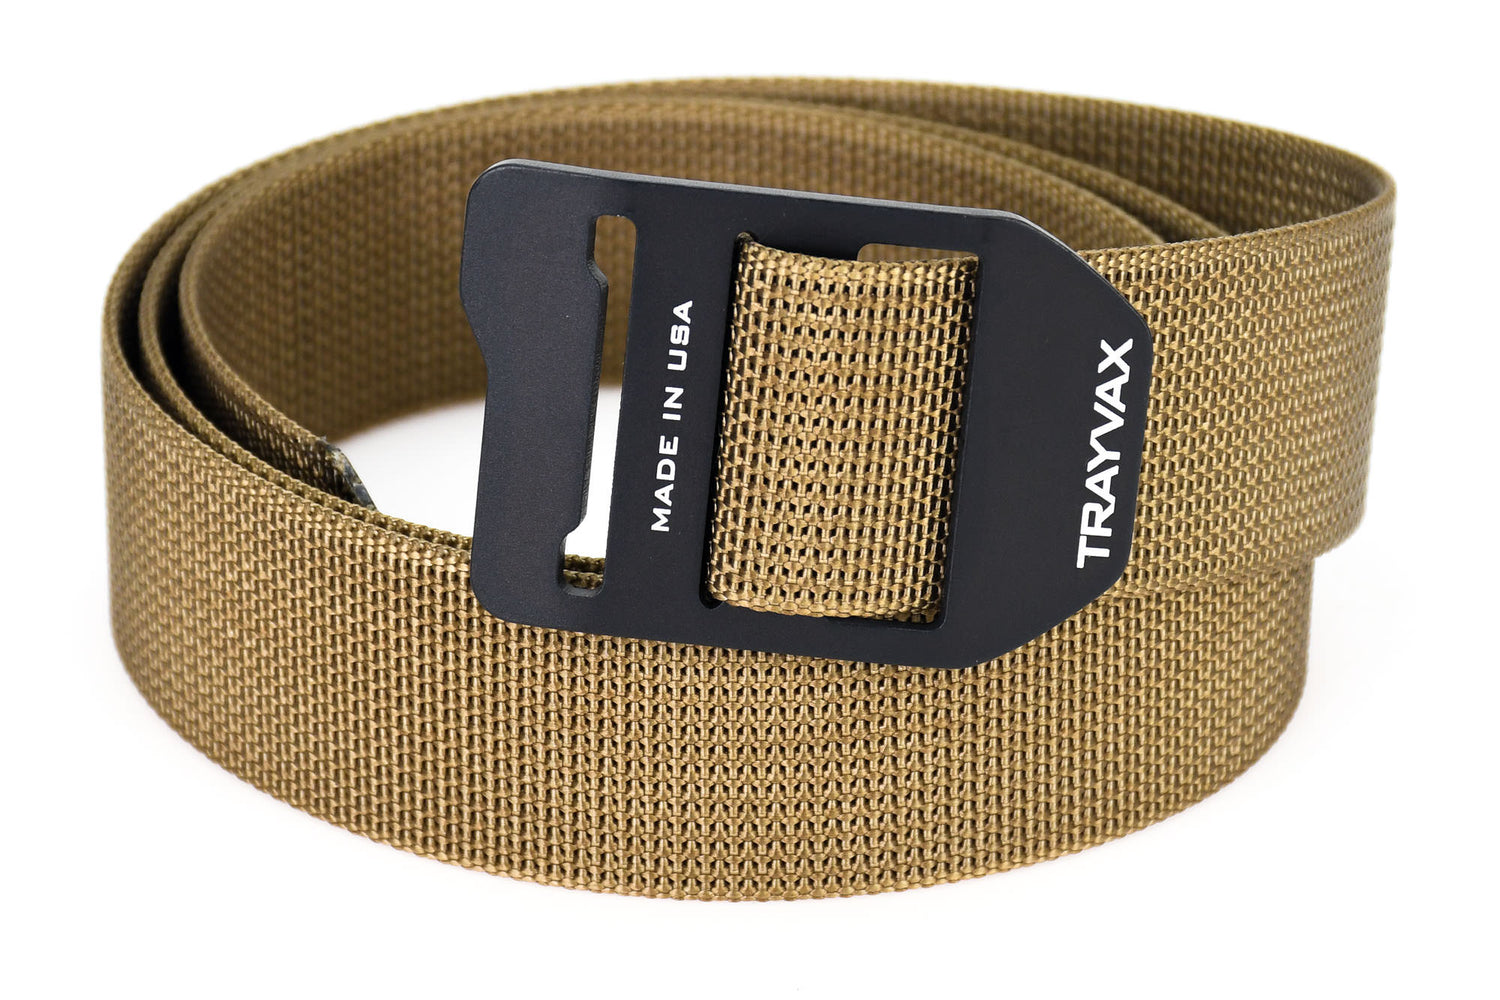 What's The Role of the Belt in Your Personality? - A Trayvax Article